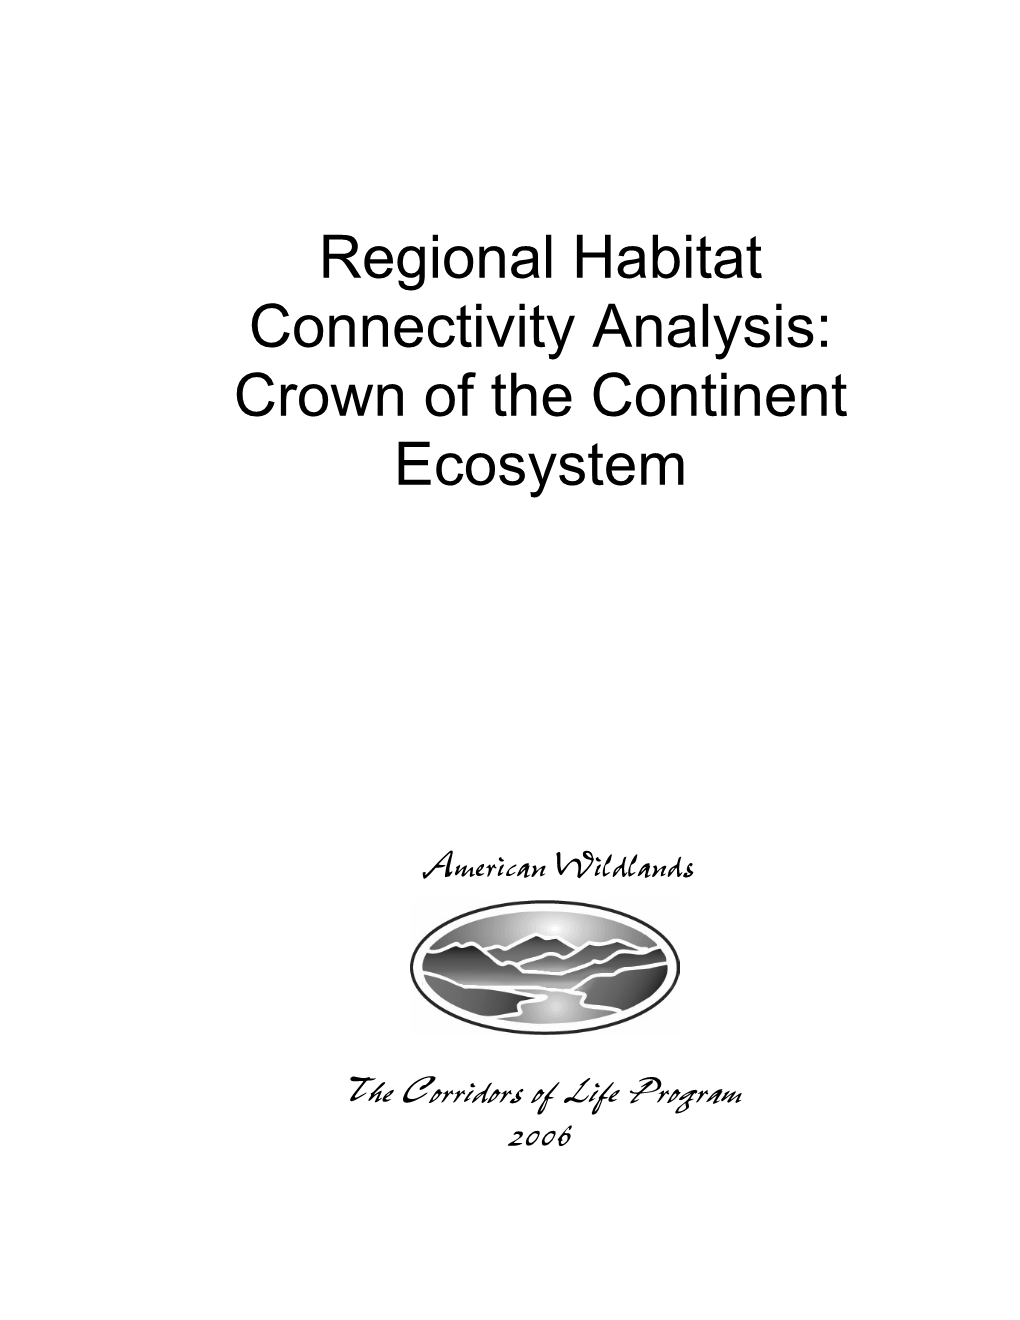 Regional Habitat Connectivity Analysis: Crown of the Continent Ecosystem